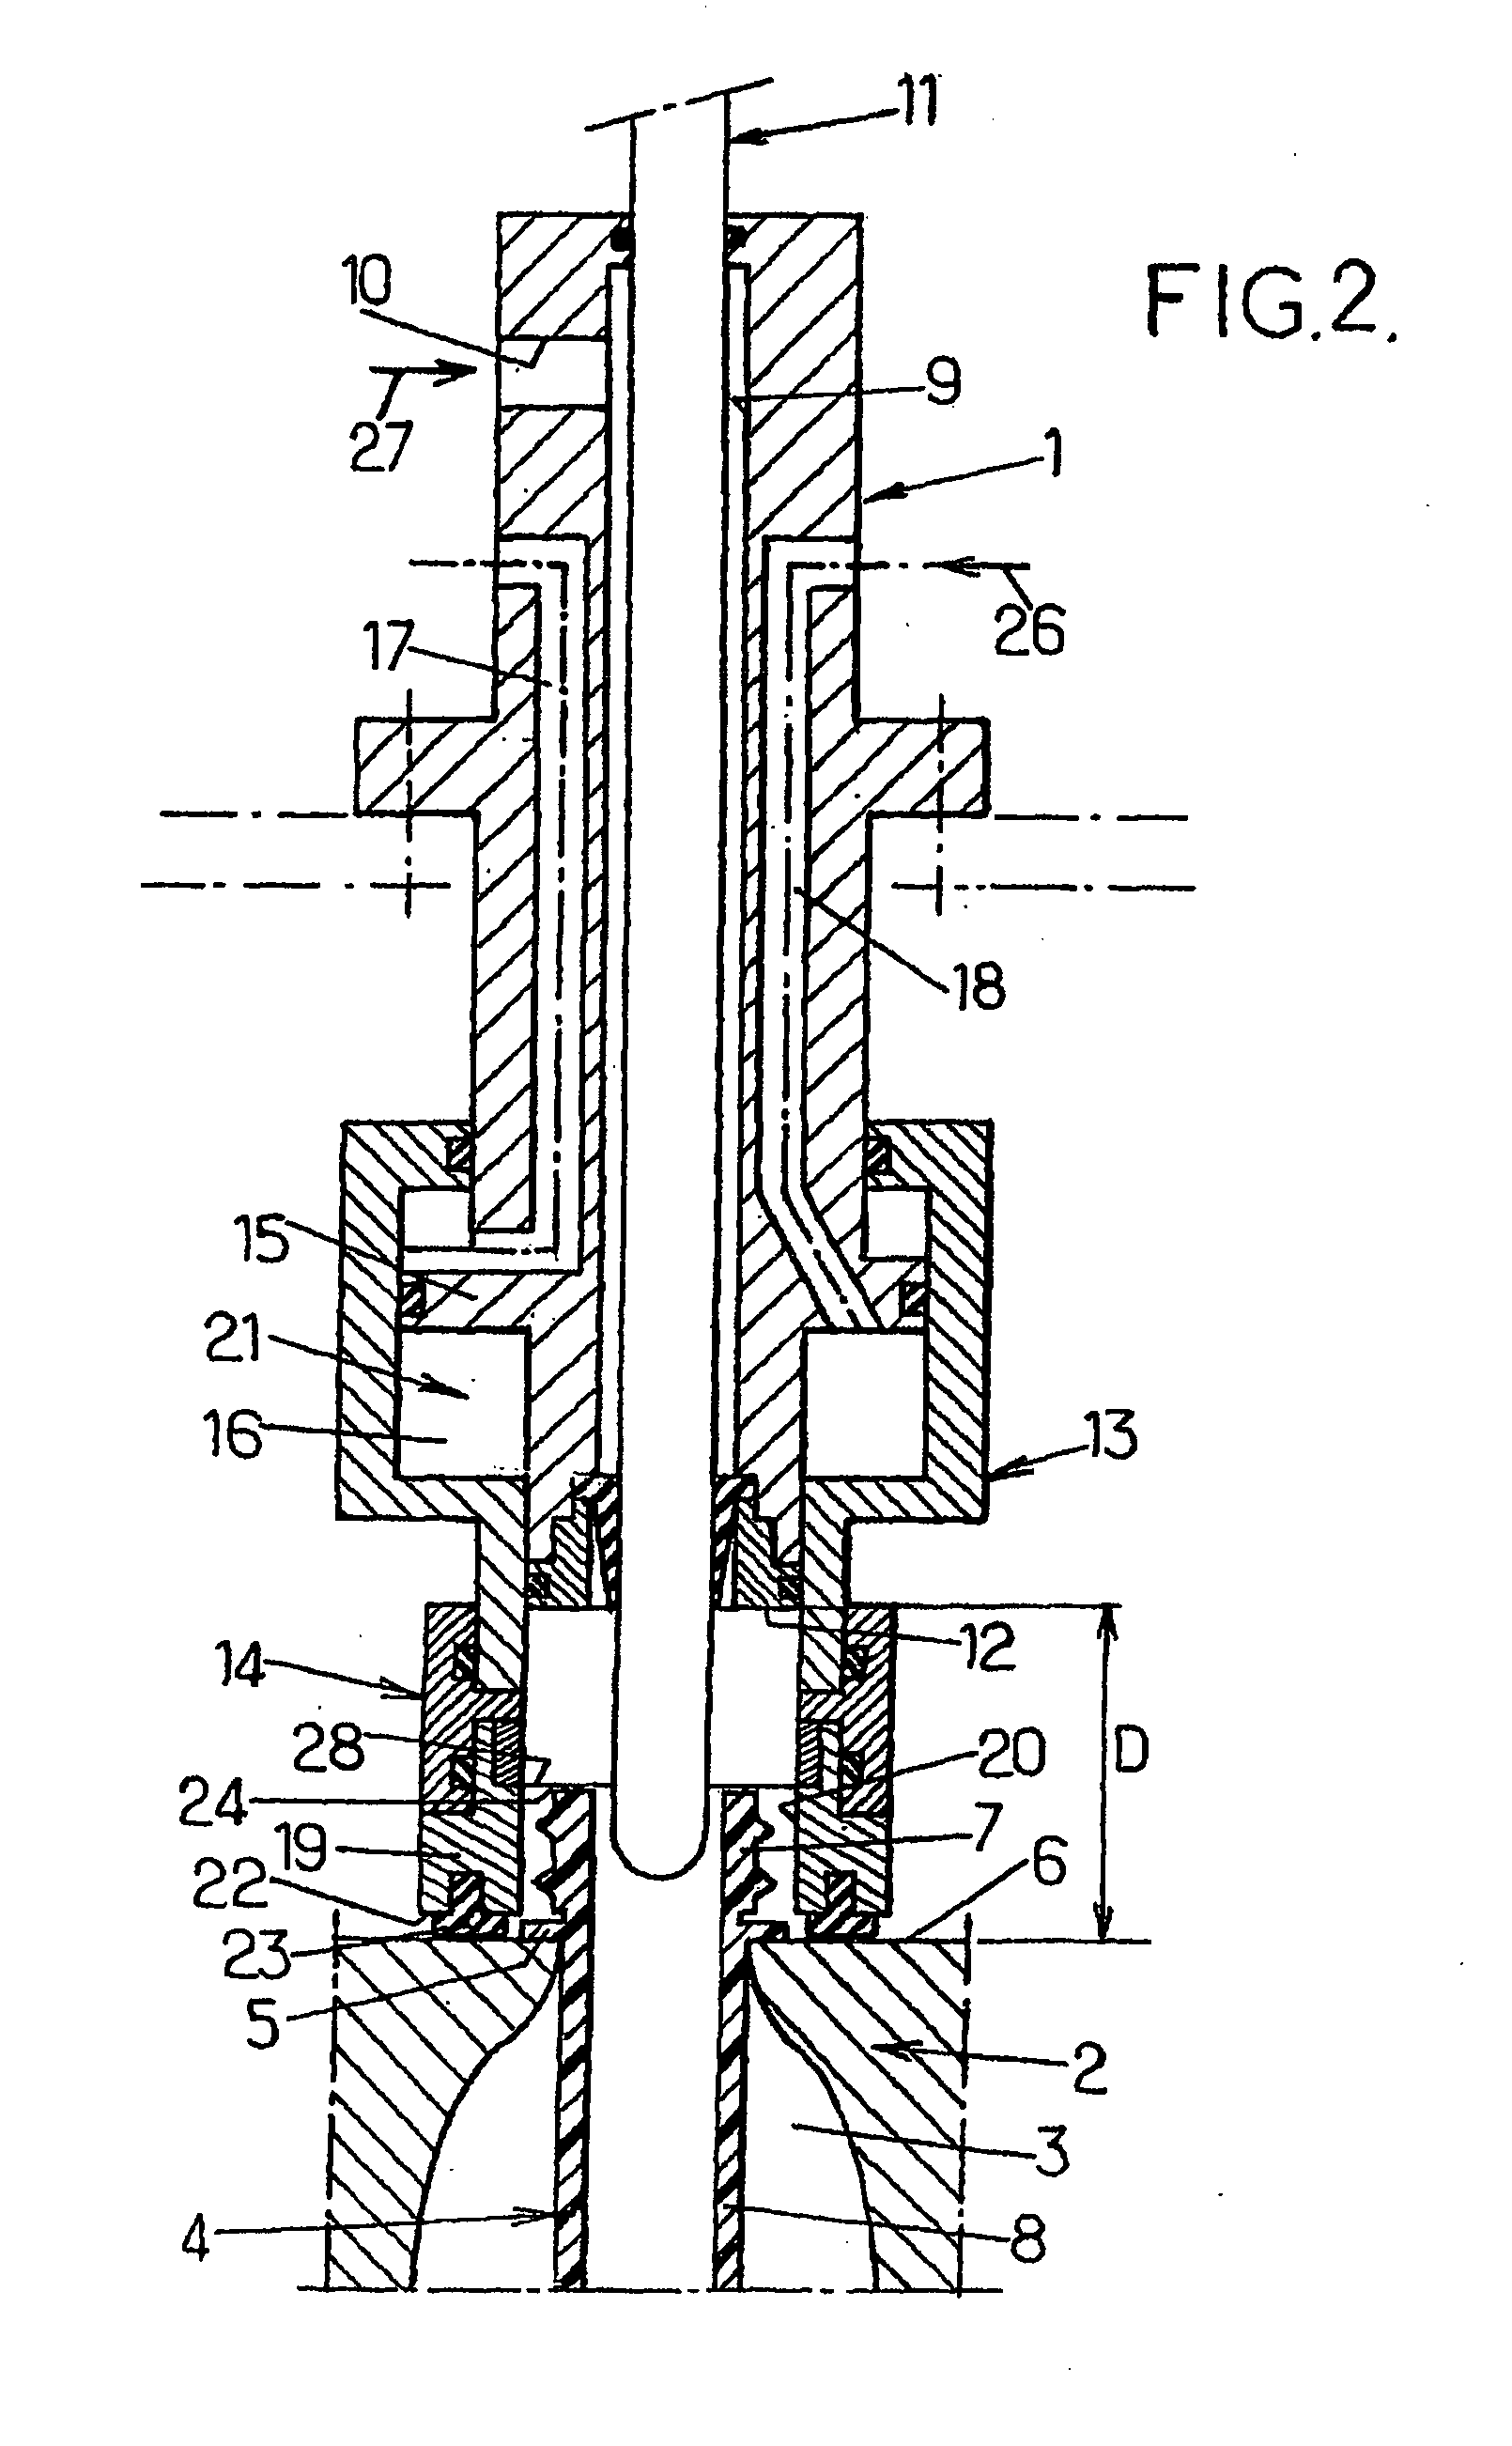 Blow Molding System for the Manufacture of Thermoplastic Receptacles